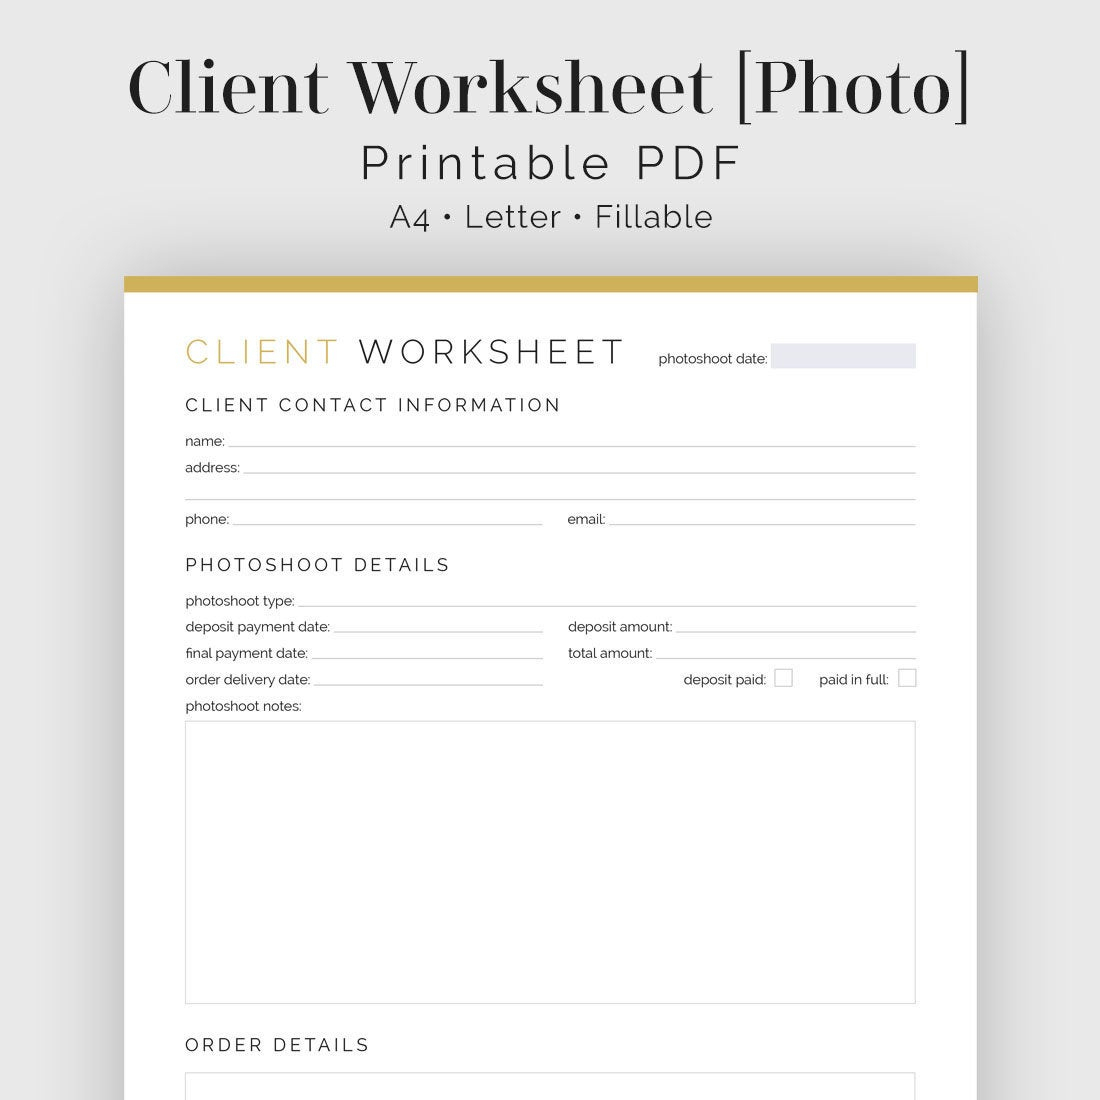 Client Worksheet Photography Fillable Printable Pdf | Etsy | Printable Photography Worksheets